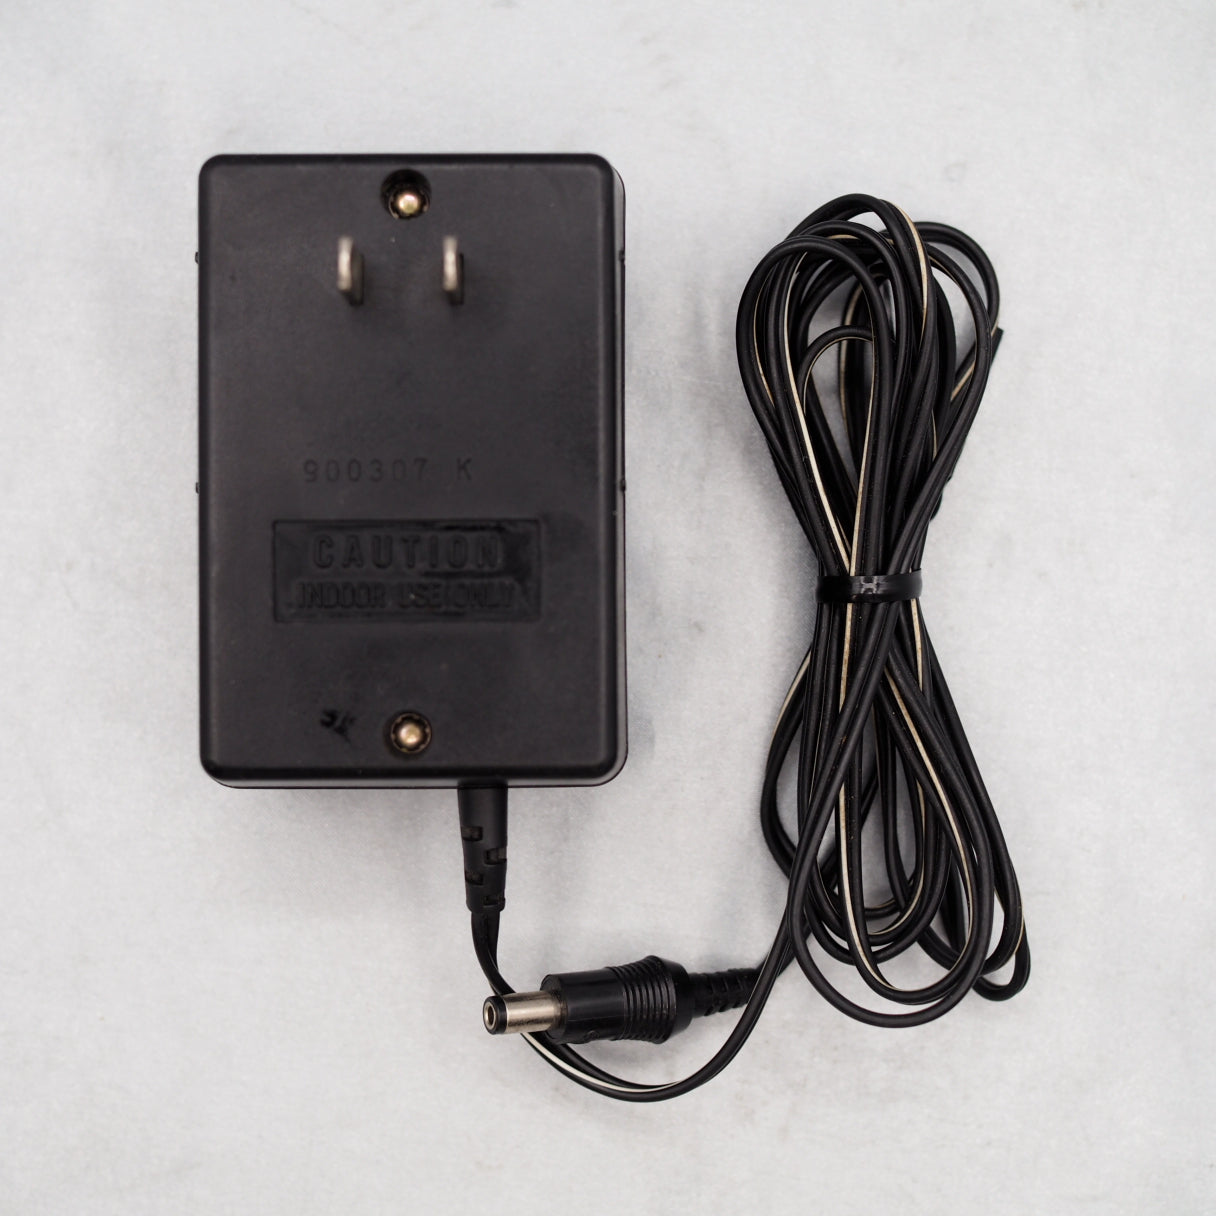 Official power adapter [For Twin Famicom]